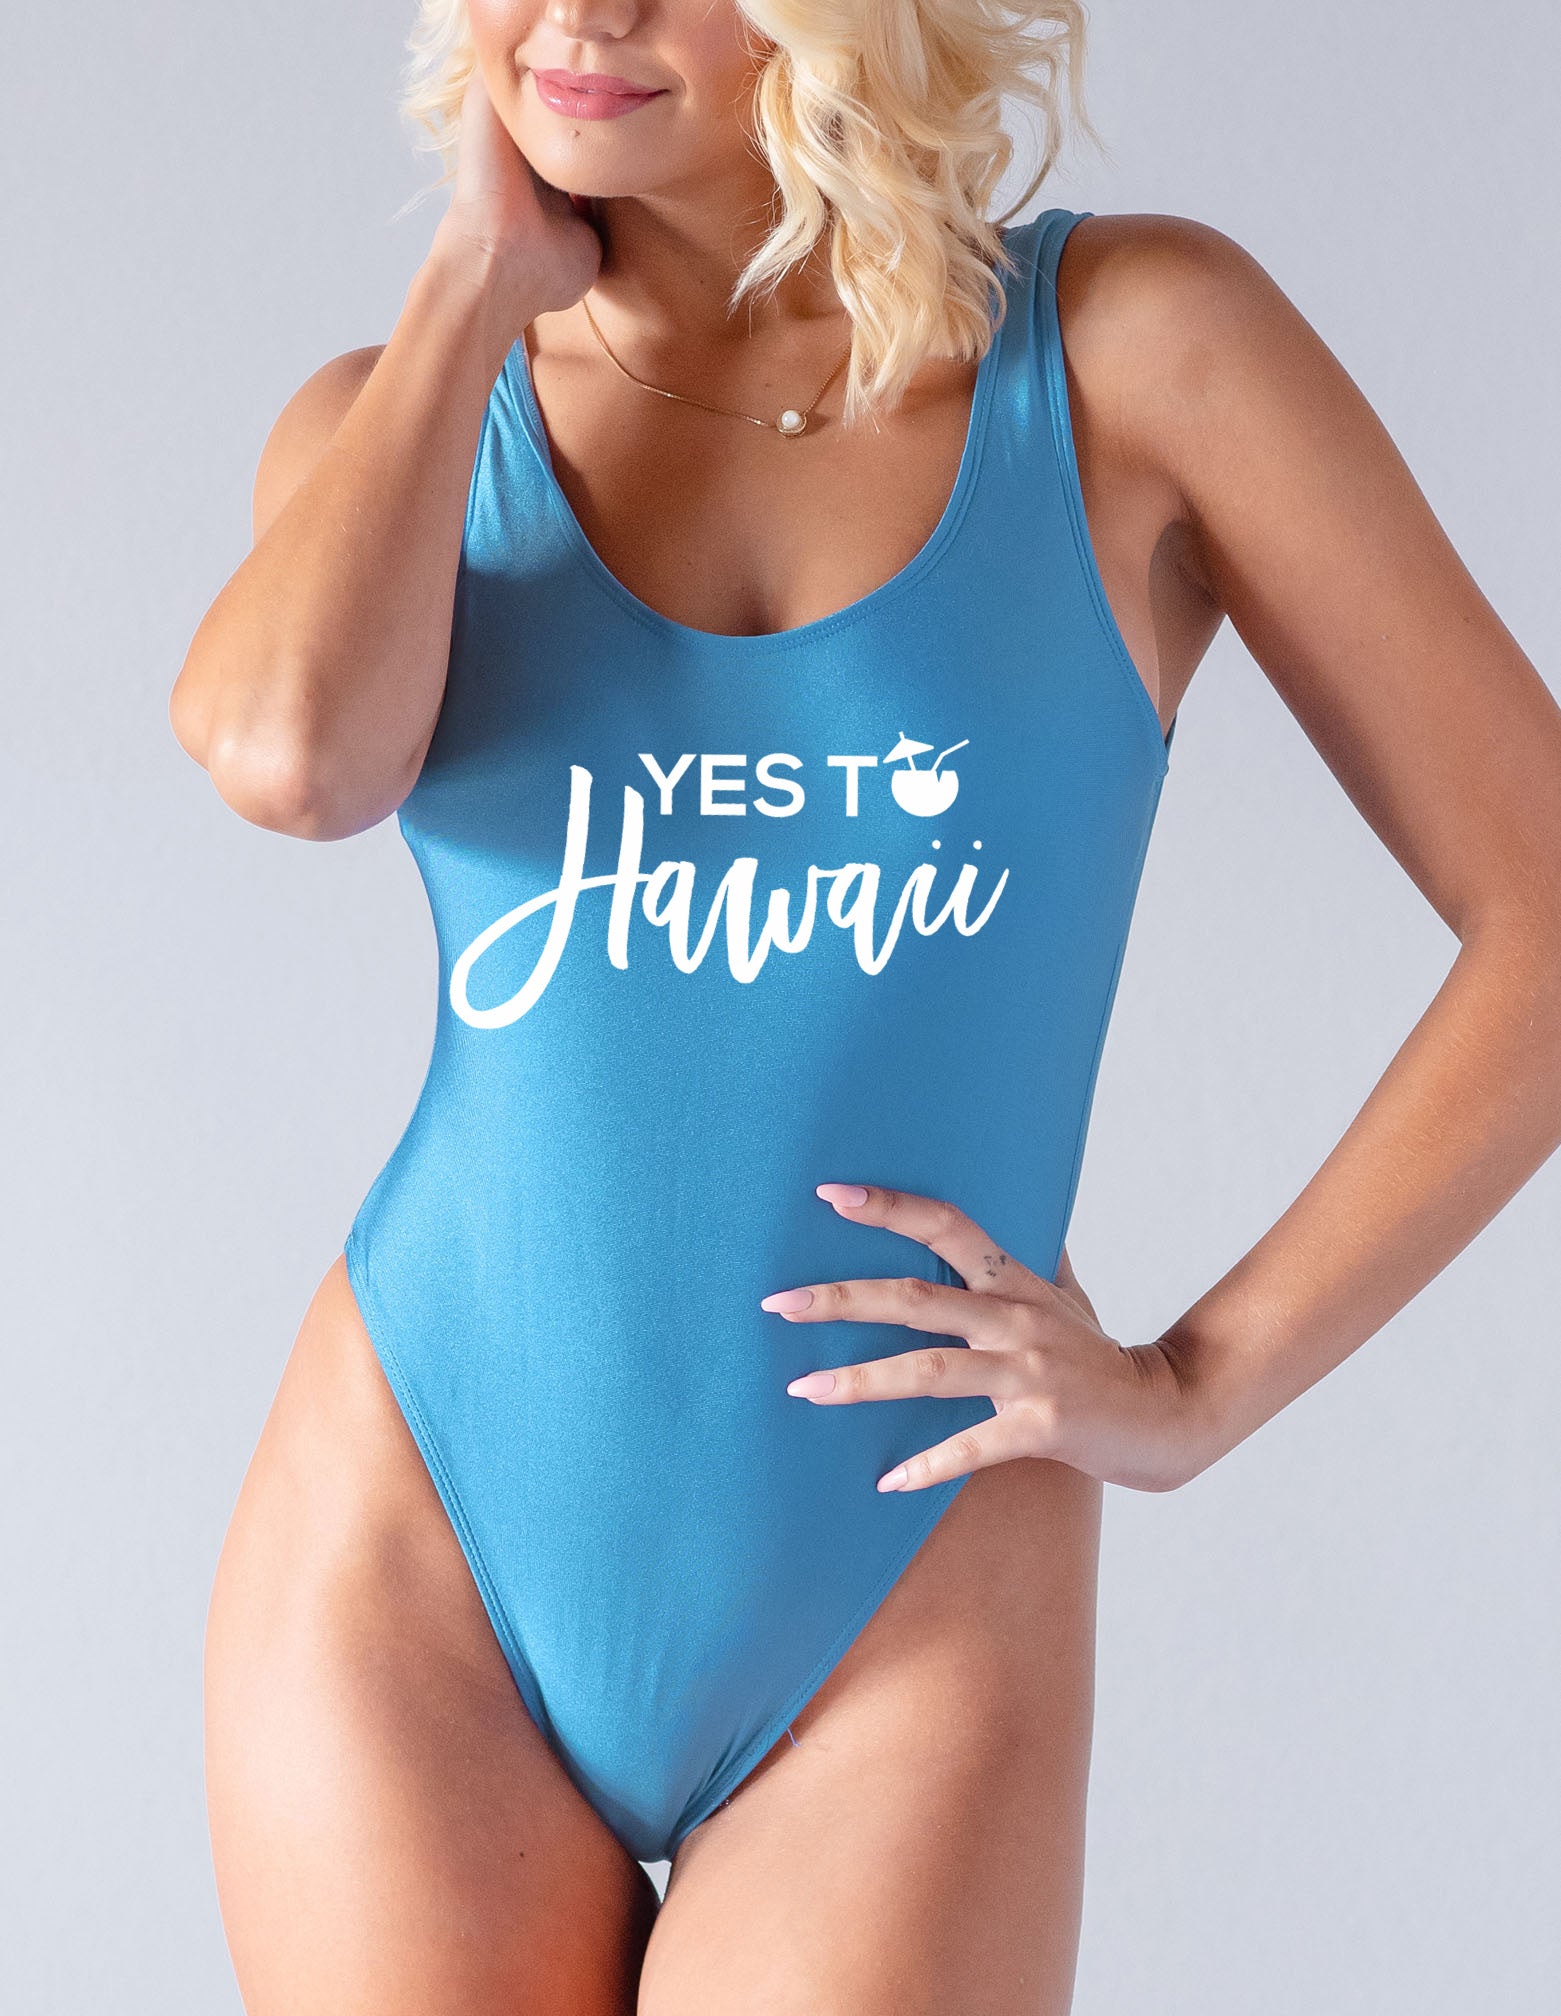 I Said Yes, Yes to Hawaii Bachelorette Swimsuits